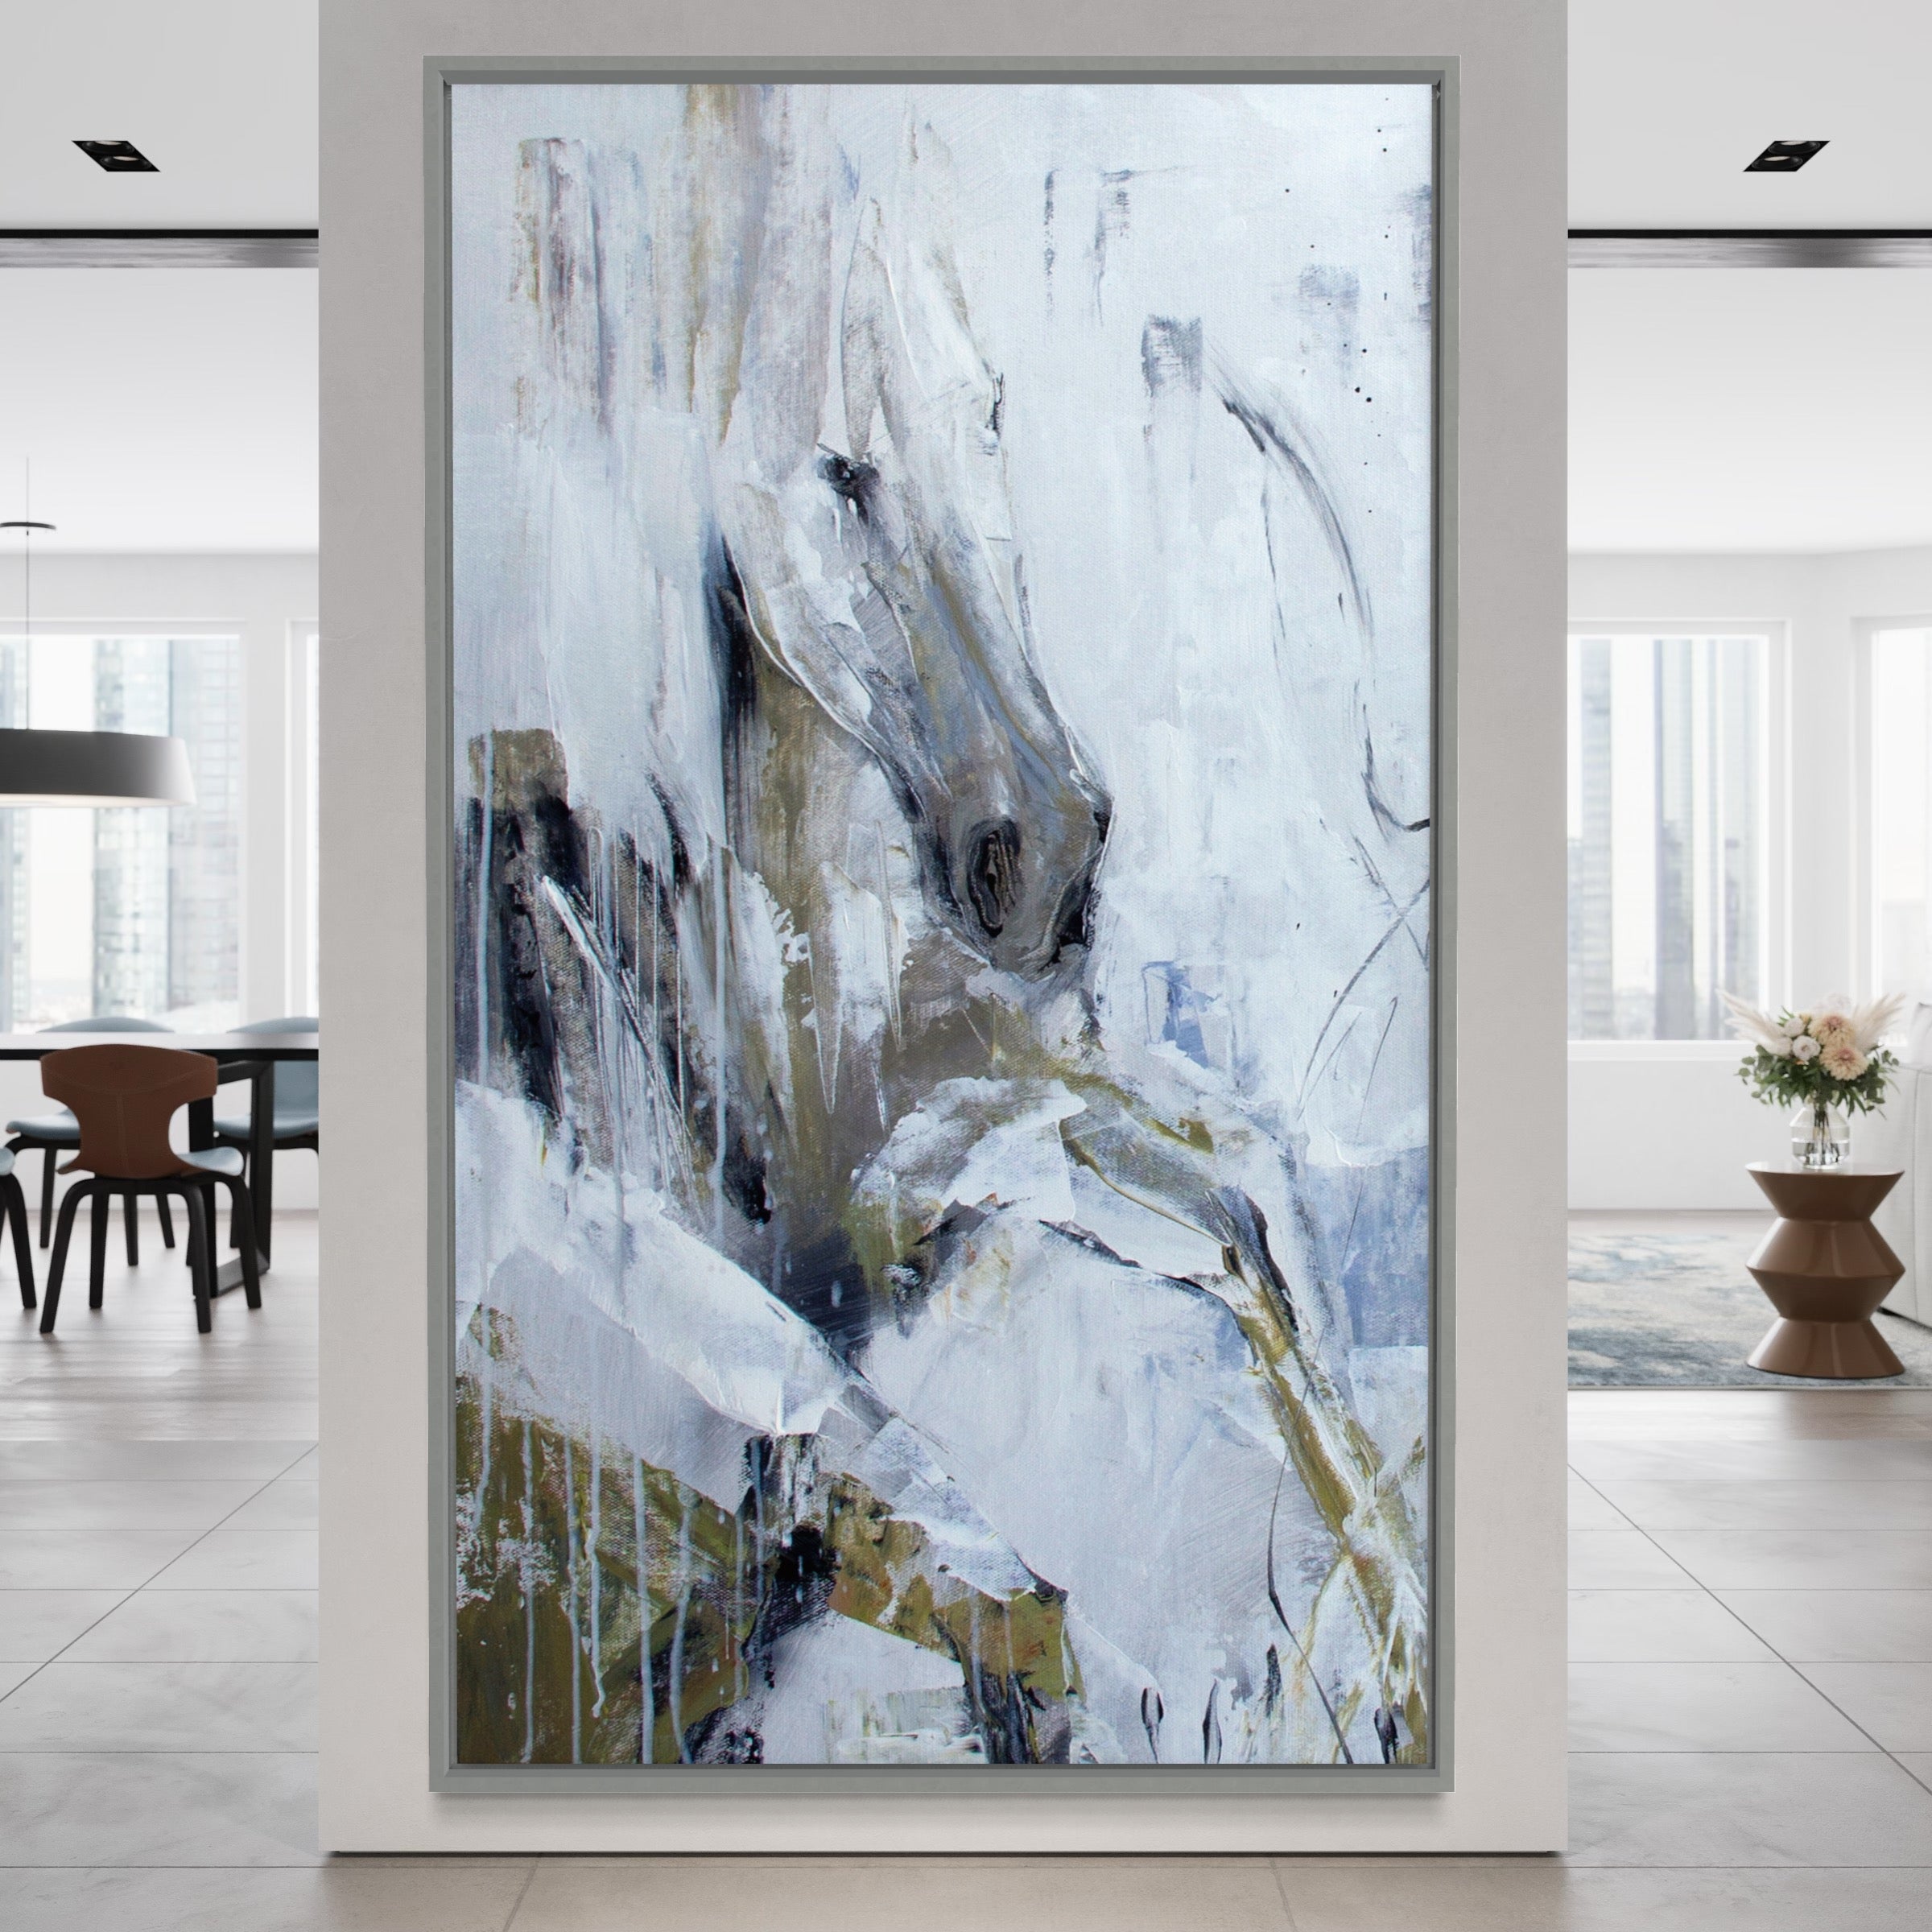 Celestial Abstractions, Gallery Wrap (With Bleed) / 54x90cm